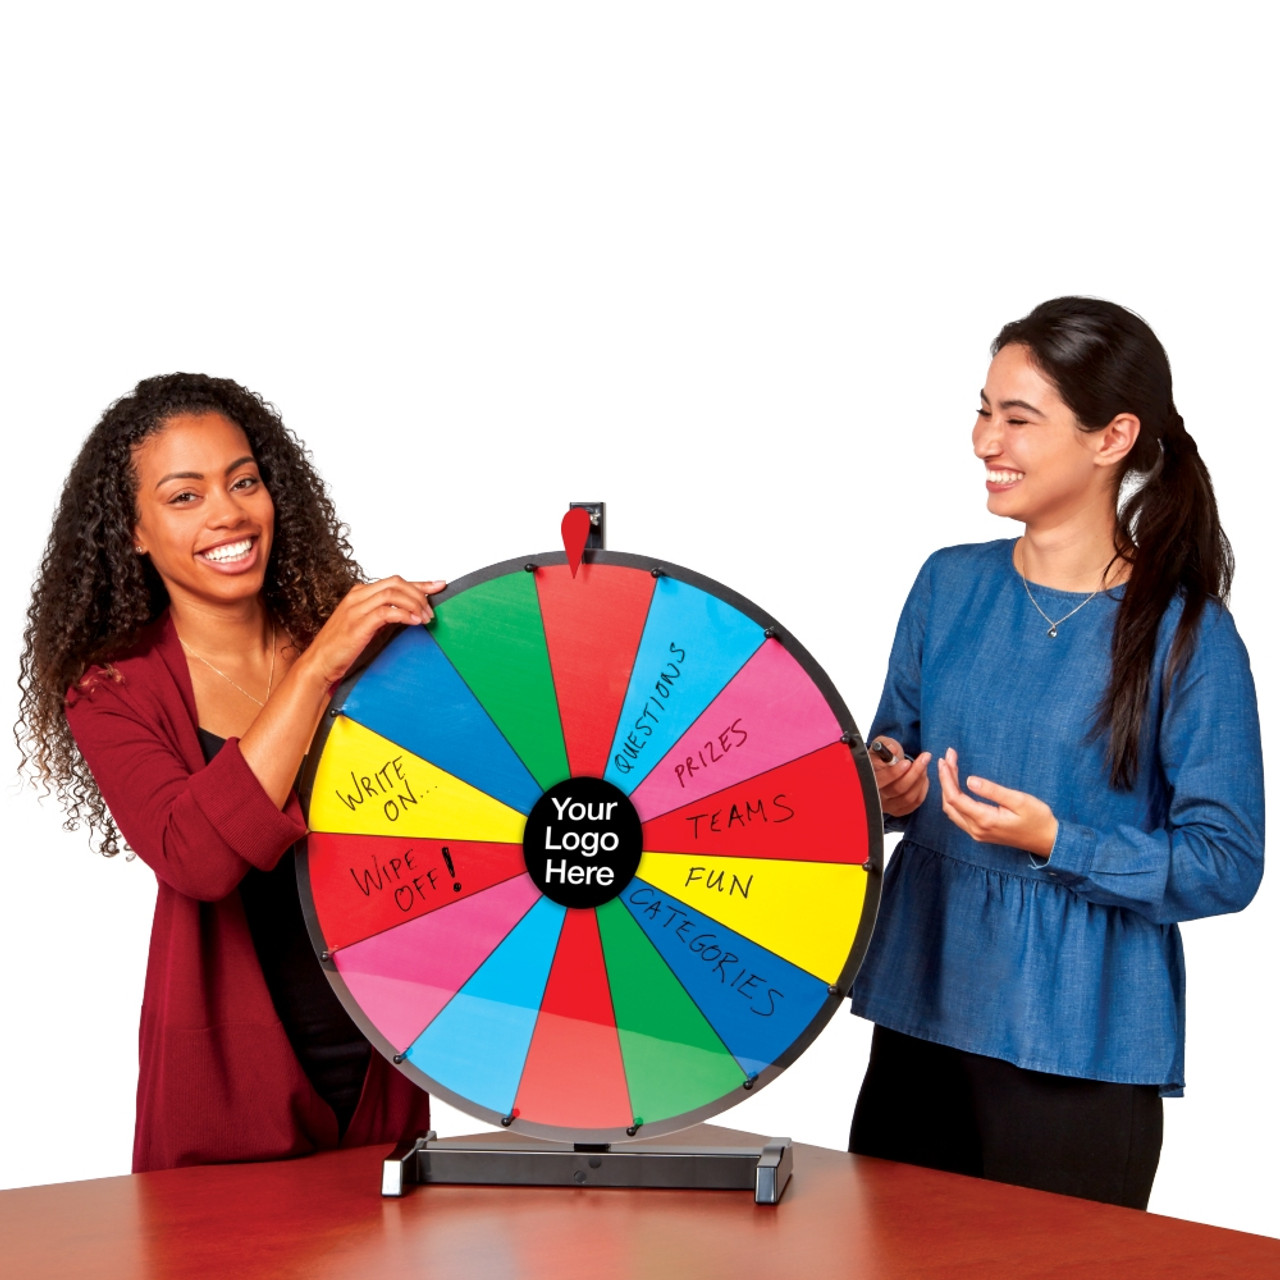 Spin and win real prizes games